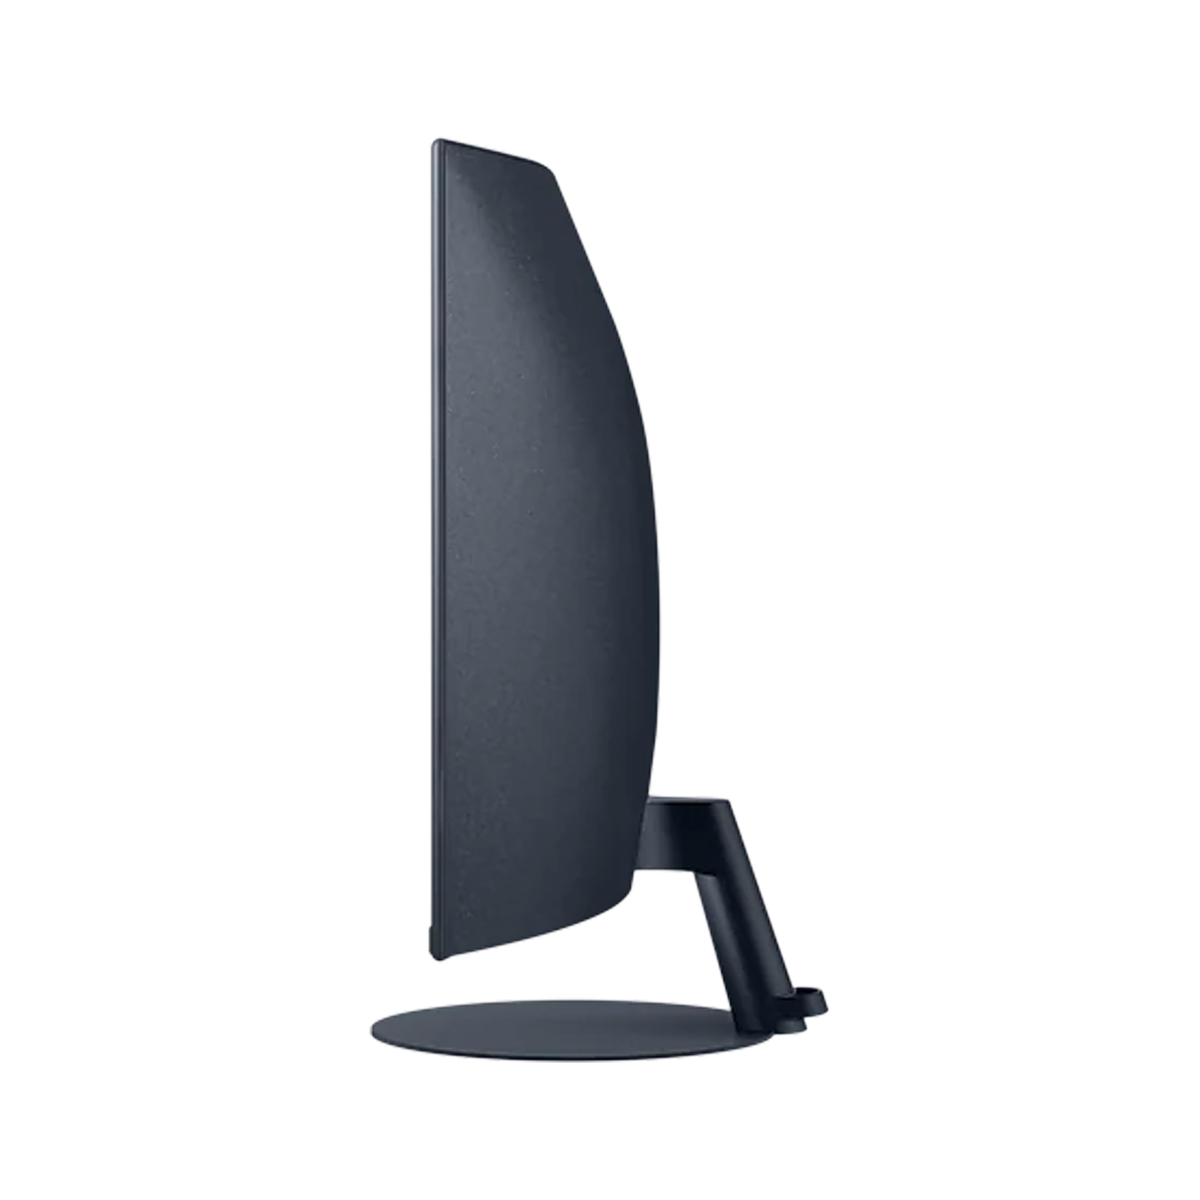 Samsung 32" CT550 Curved Monitor LC32T550